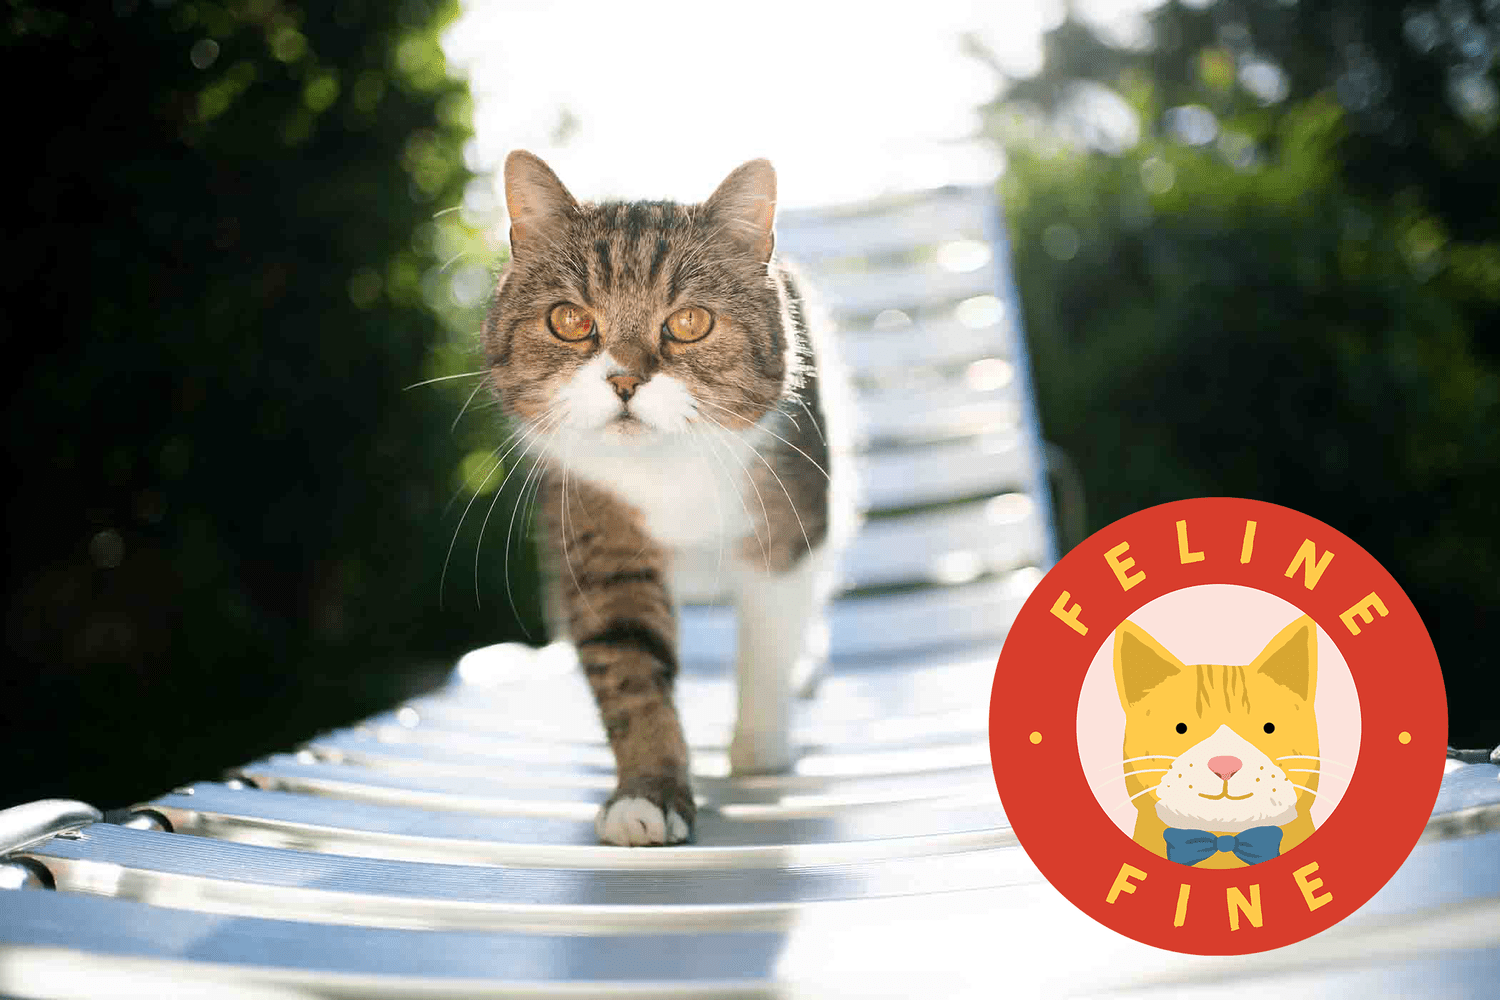 cat walking on outdoor furniture in the sun; how to keep cats cool in the summer with feline fine logo